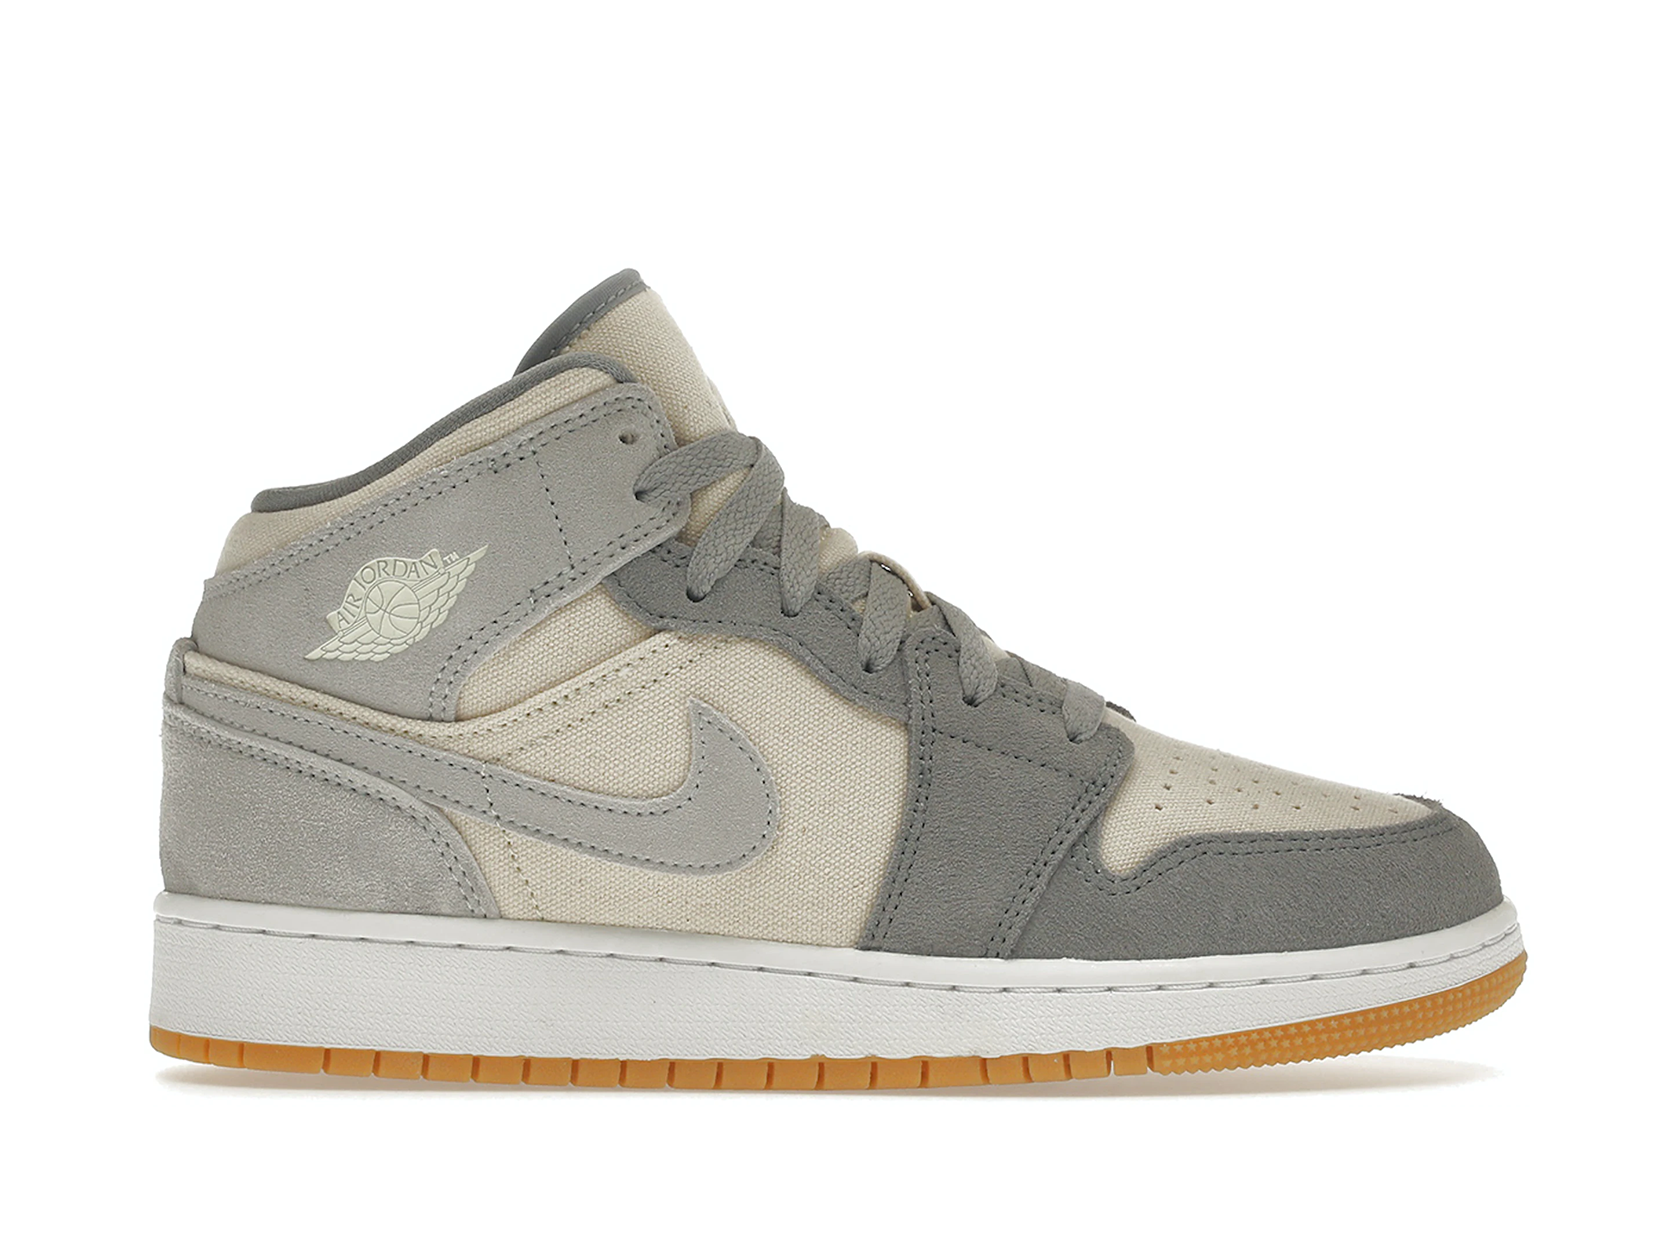 Double Boxed  214.99 Nike Air Jordan 1 Mid Coconut Milk Particle Grey (GS) Double Boxed